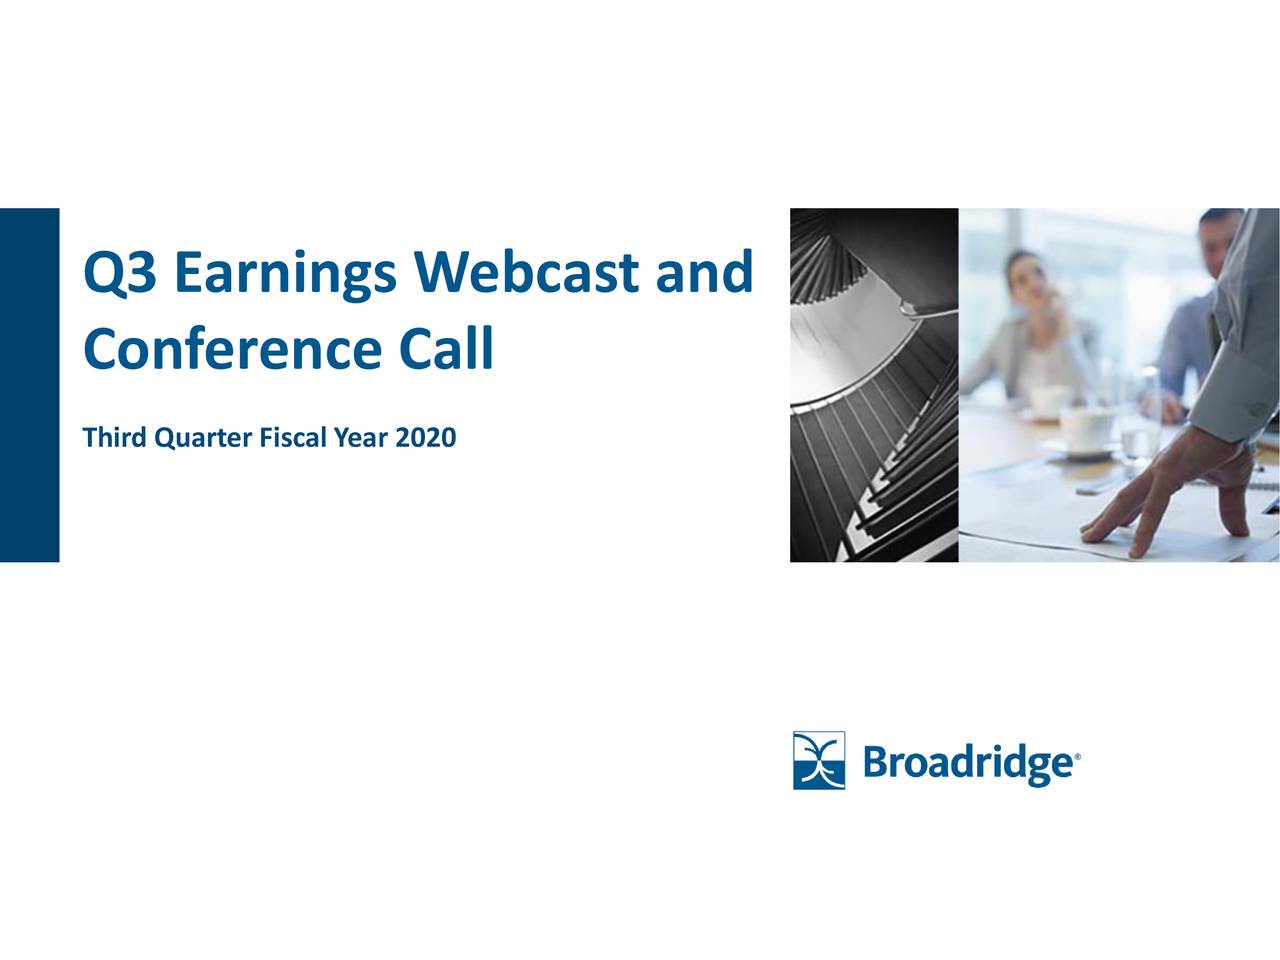 Q3 Earnings Webcast and